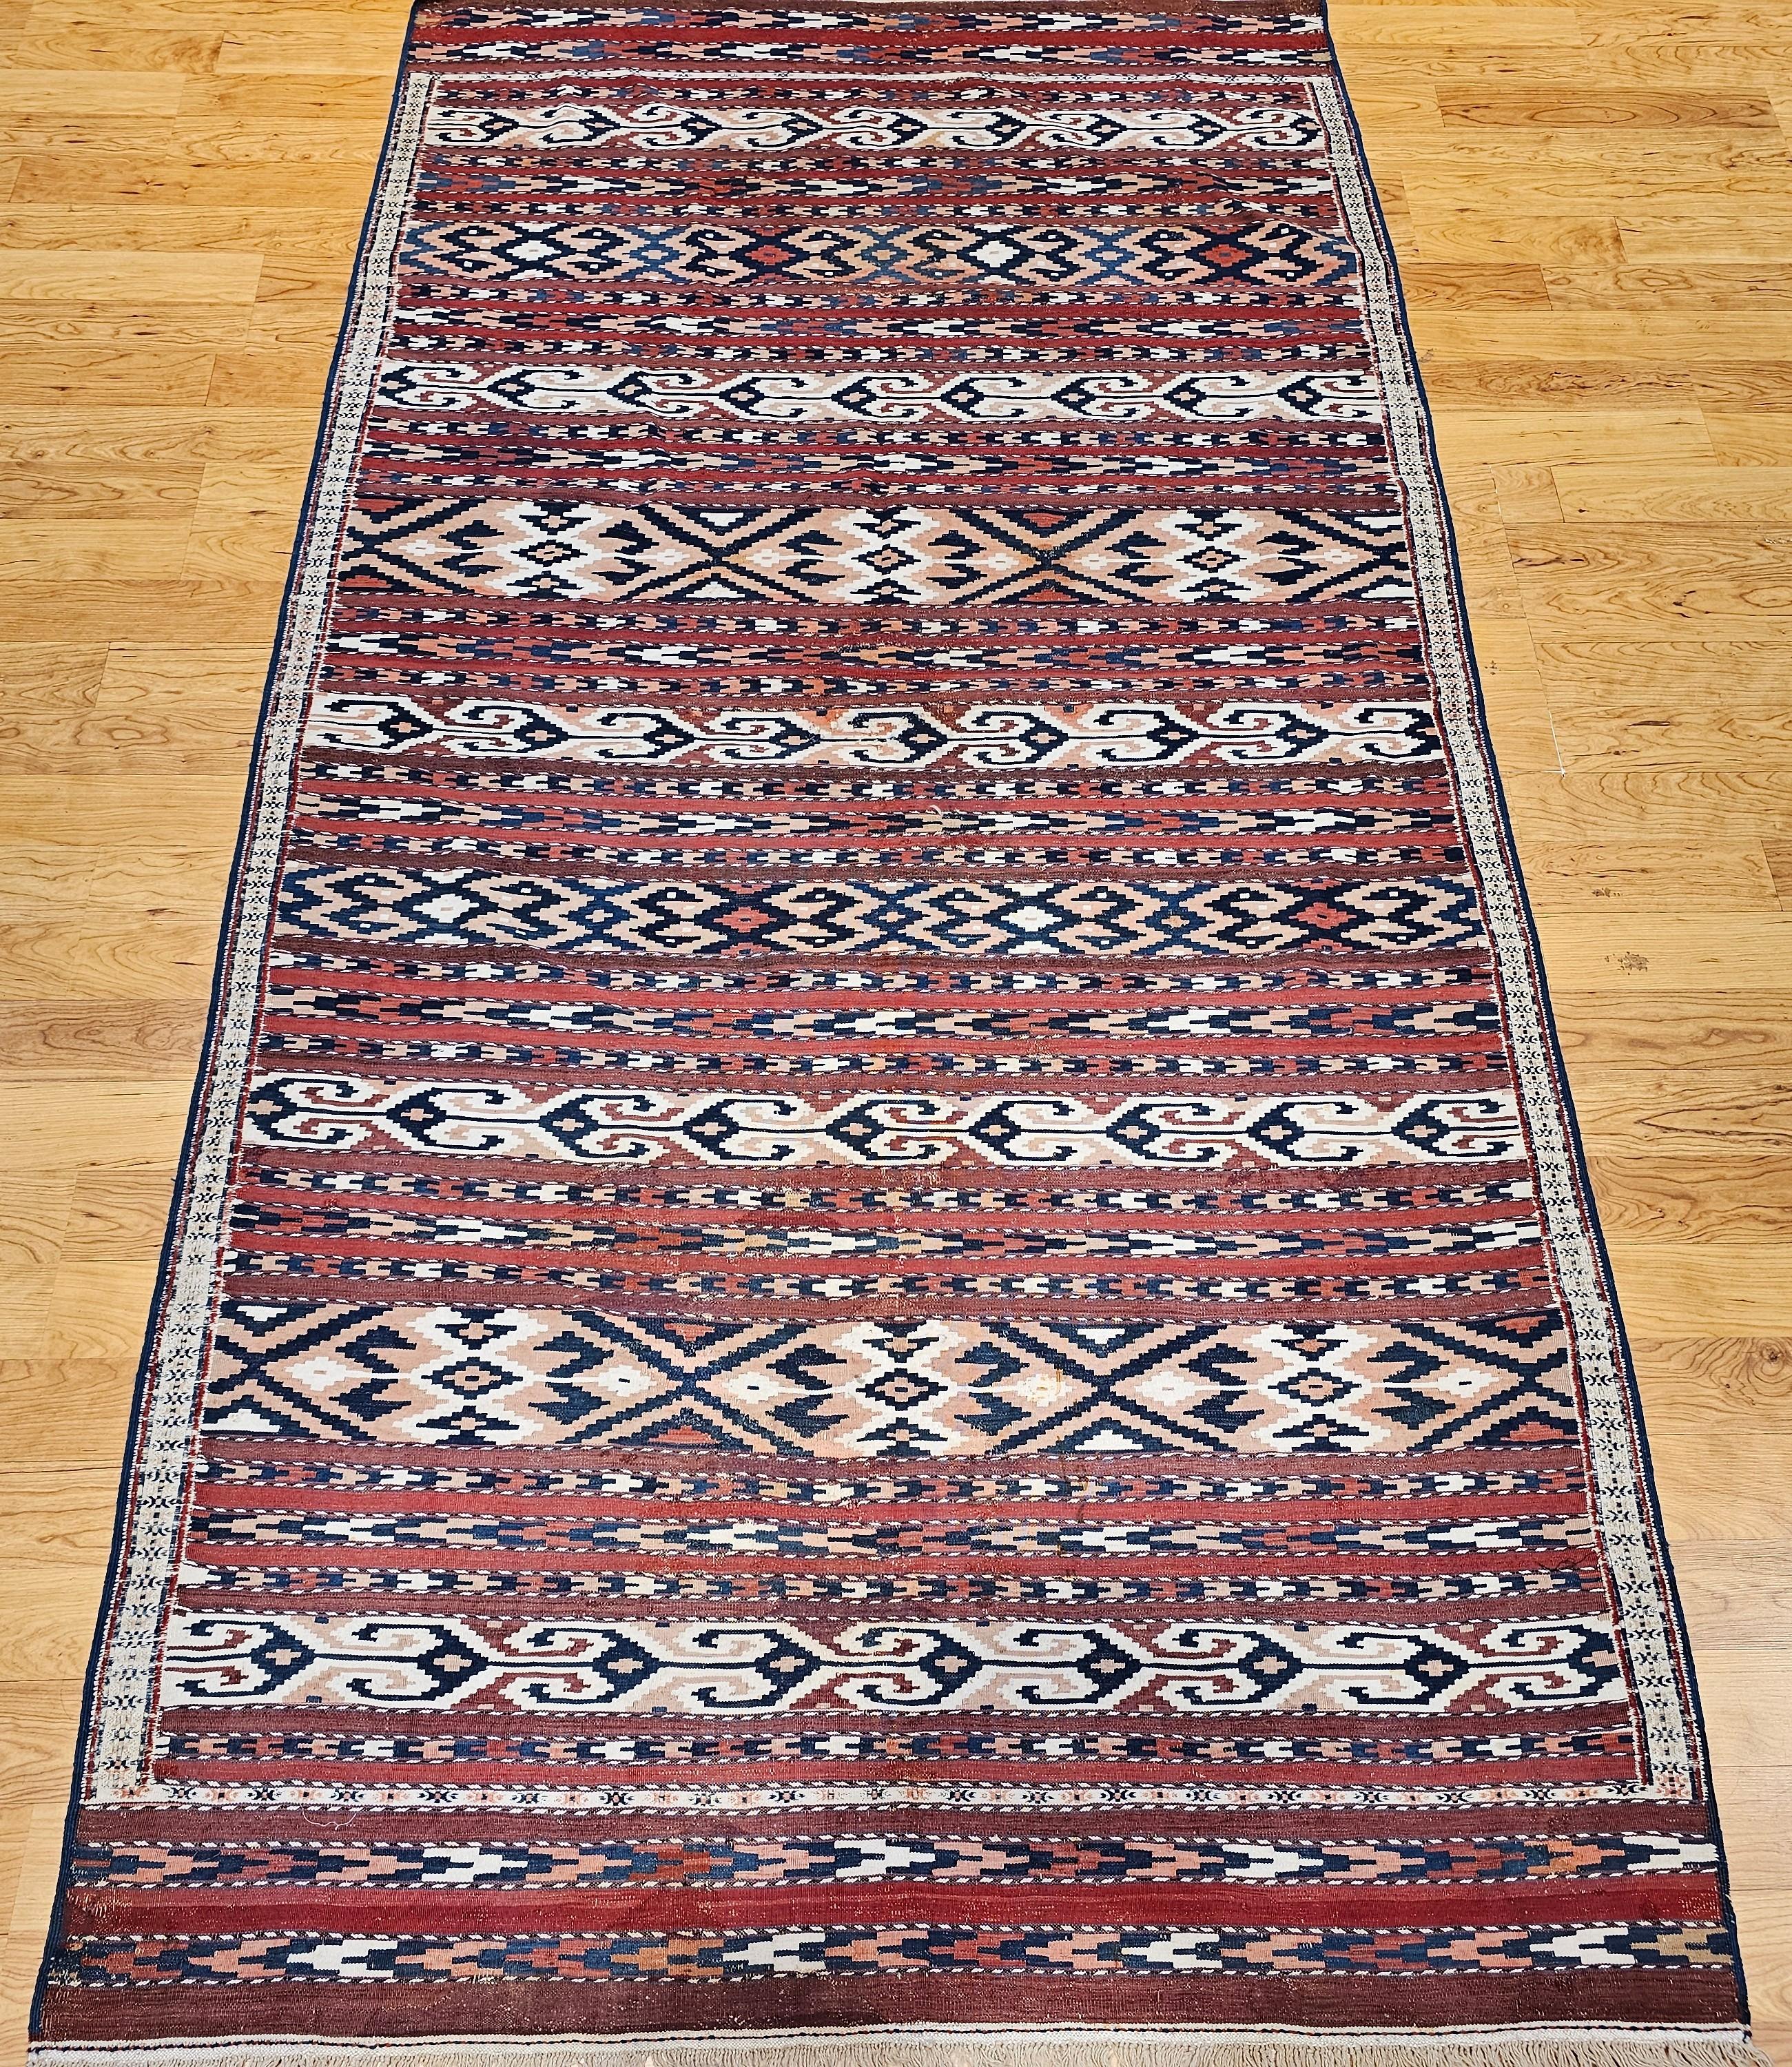 Early 20th century Turkmen Yomut tribal rug from Central Asia in a geometric stripe pattern in dark red with accent colors in French blue, rust, brown, and ivory.   It is a very rare and highly seeked Turkmen kilim with the distinctive “Turkmen